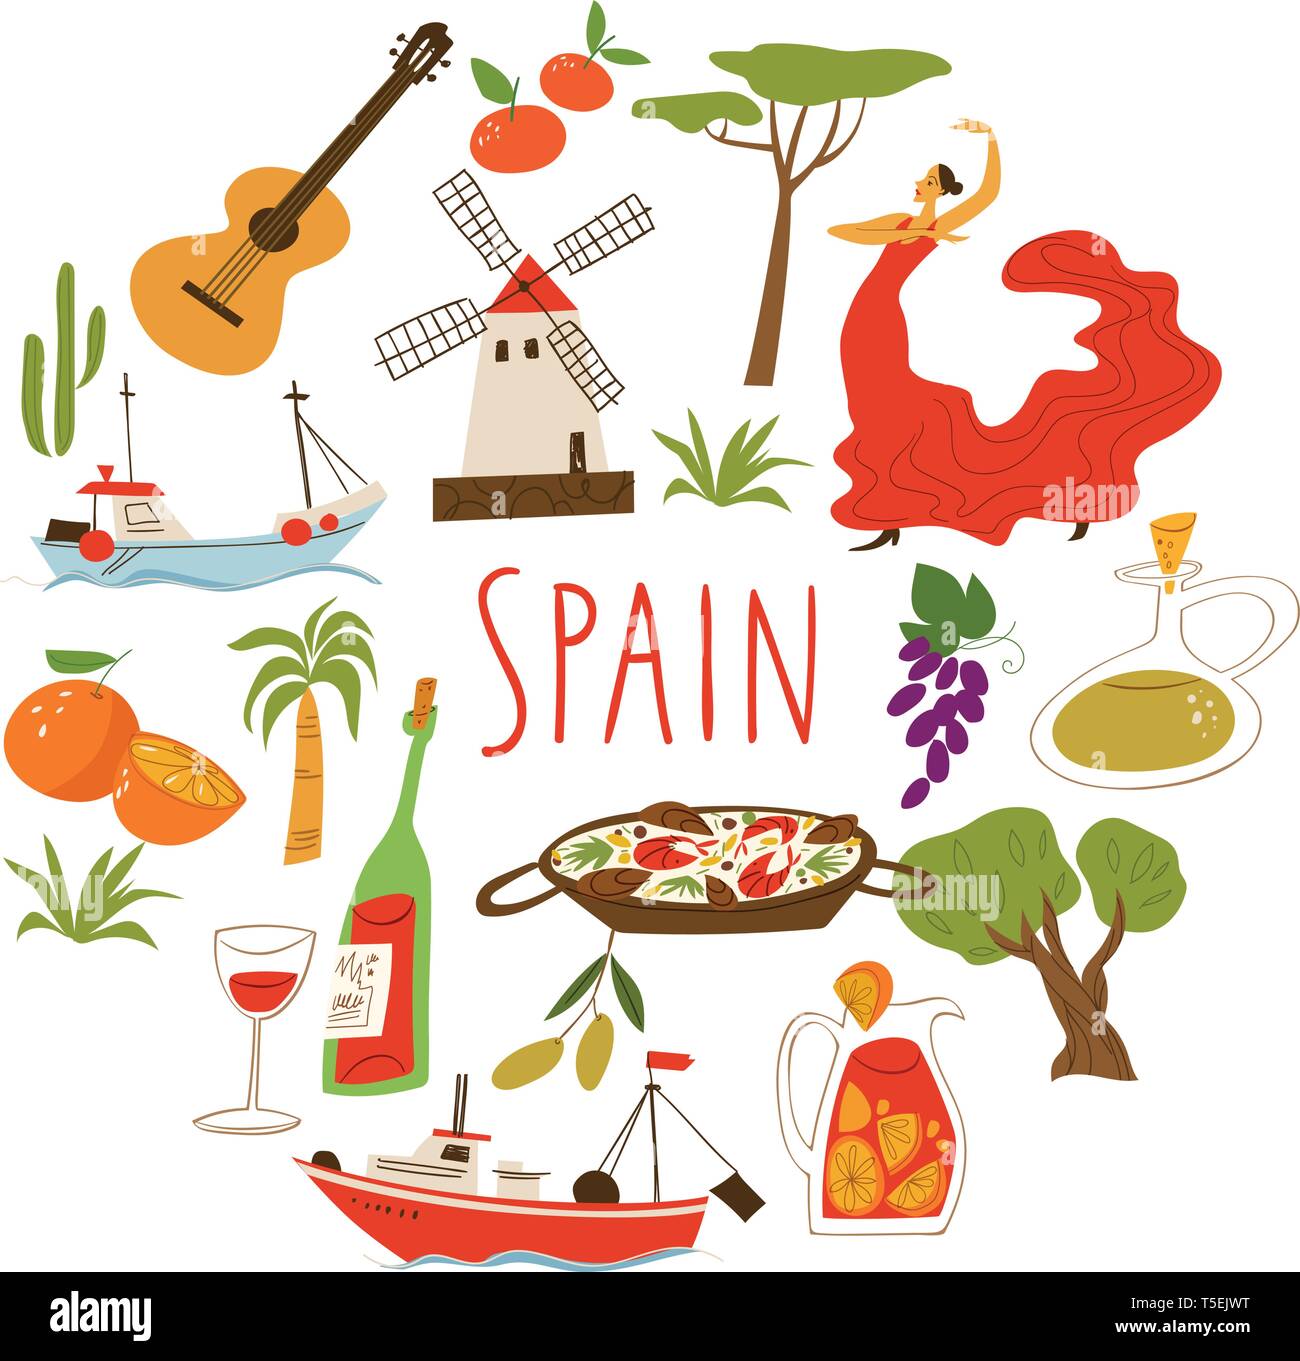 Nine Vector Symbols Of Spain Culture Food Ship And Archtecture Stock Vector Image Art Alamy